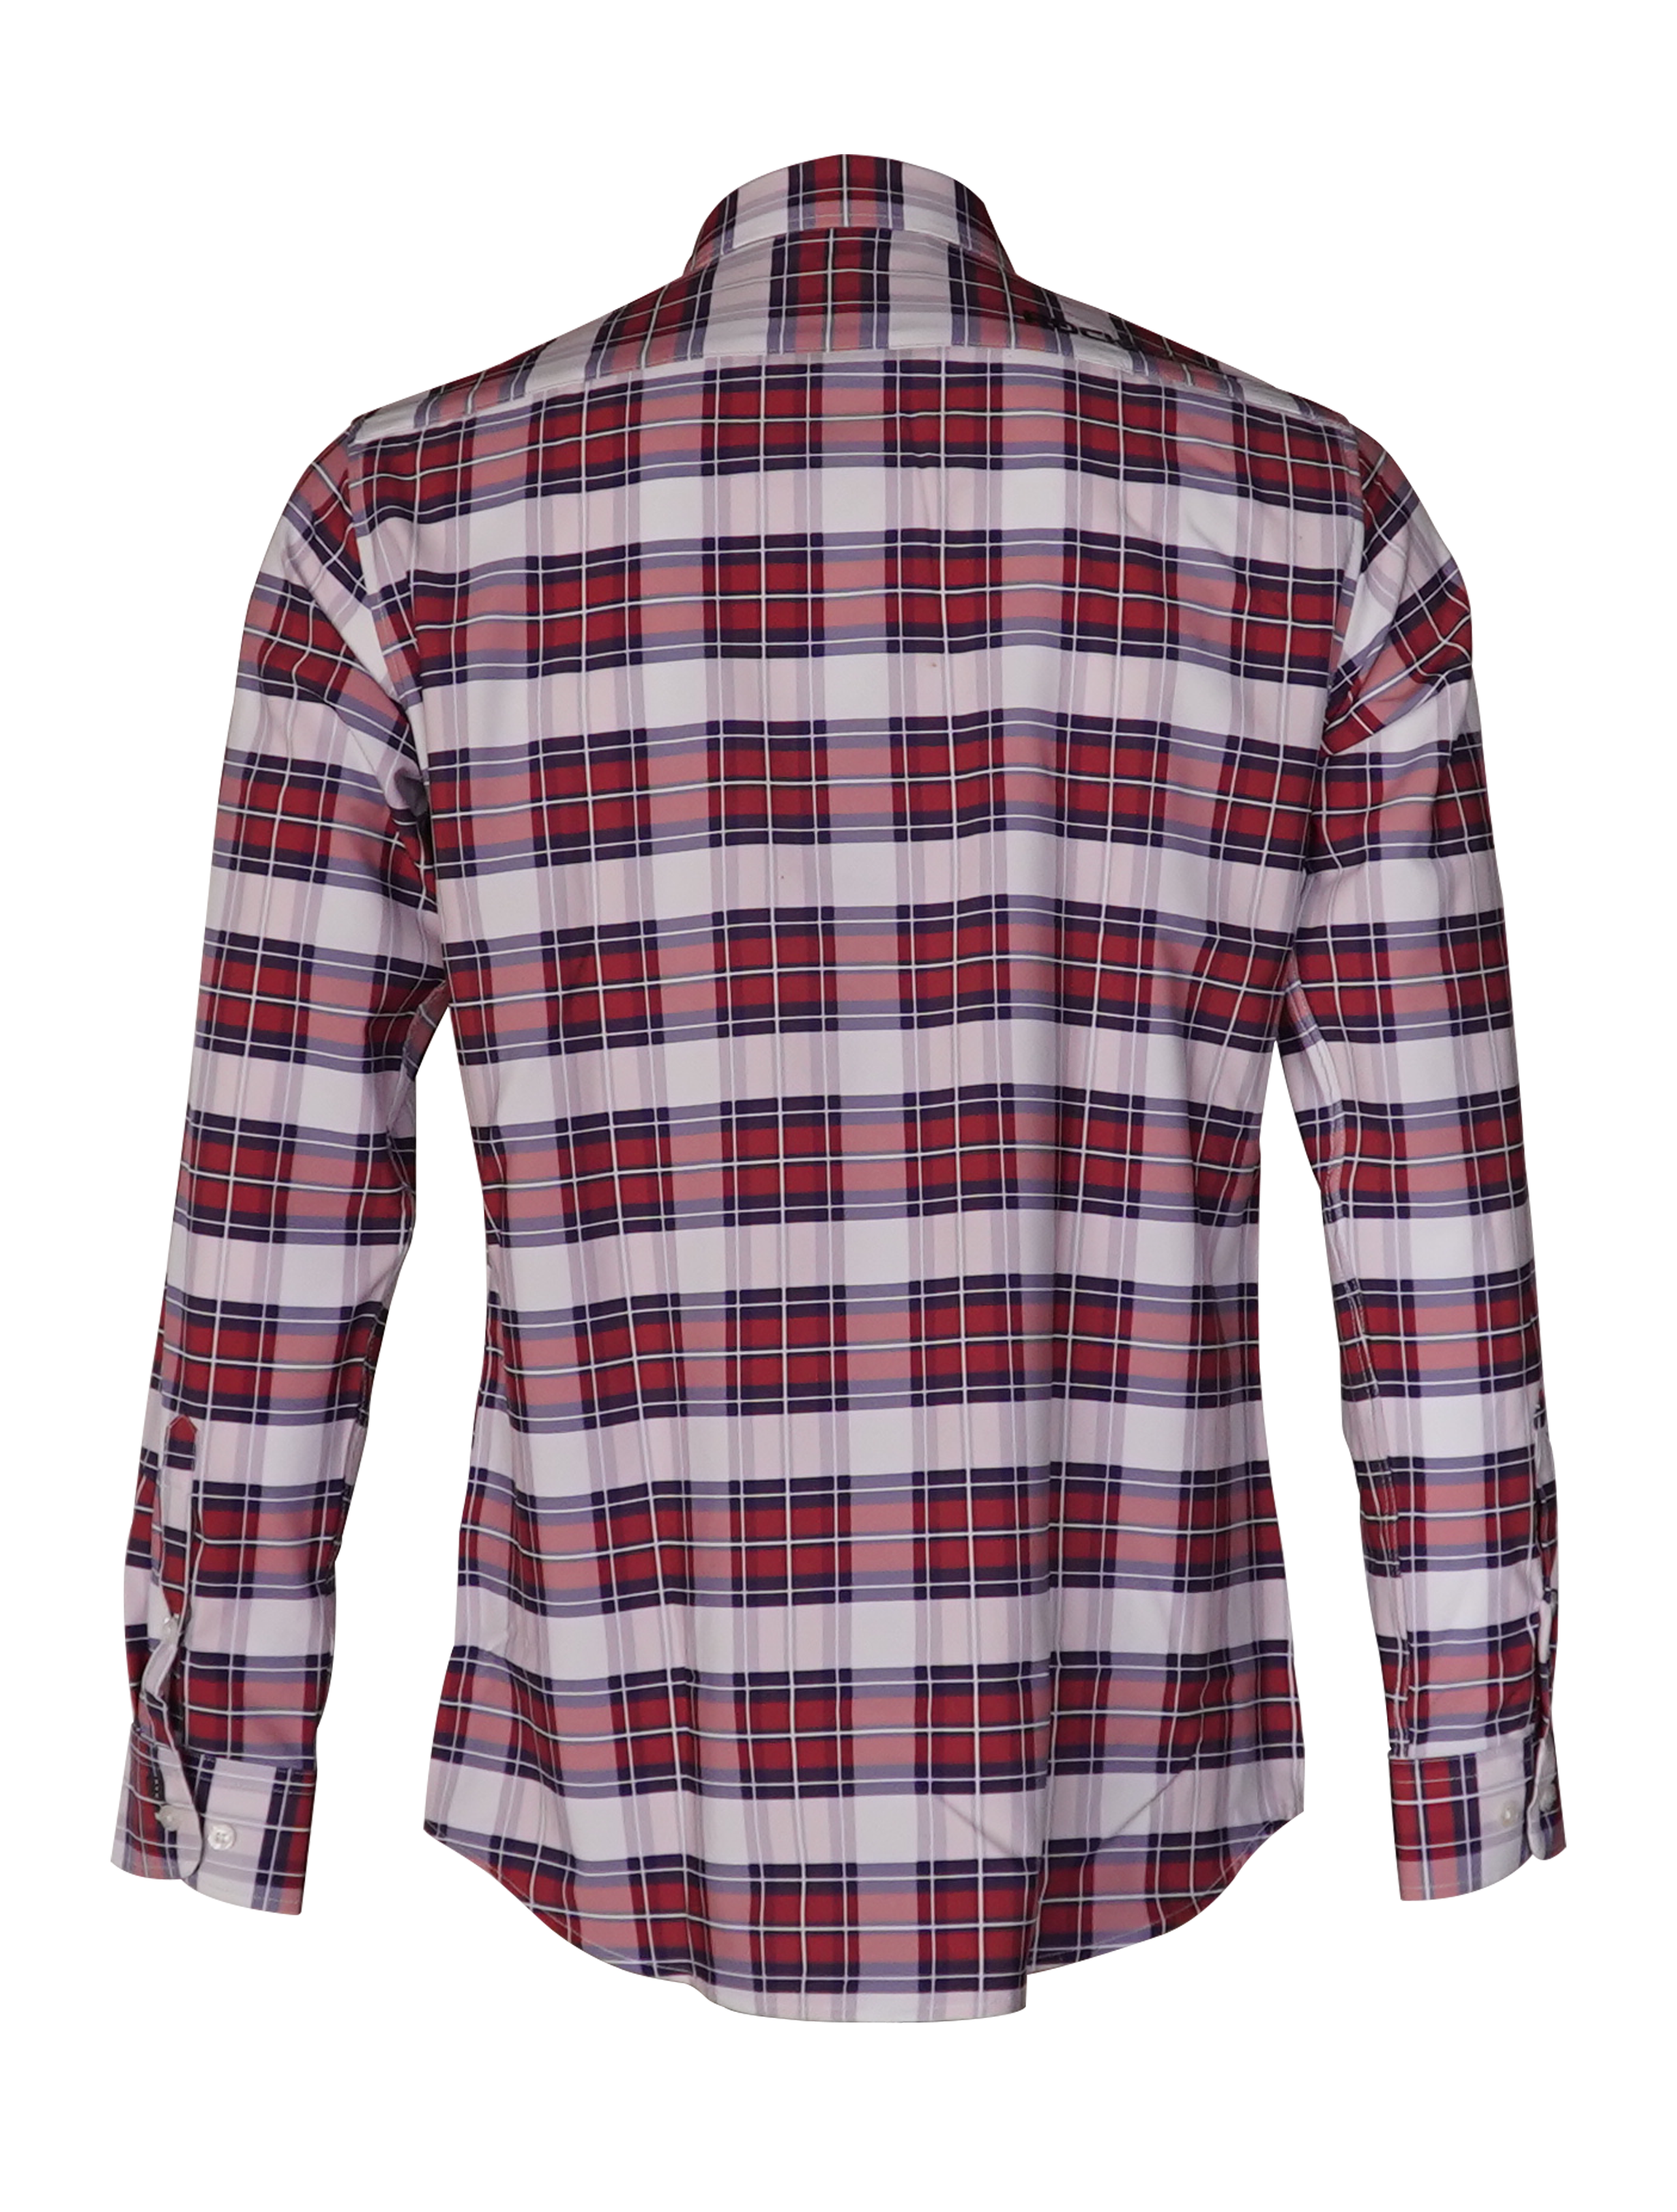 The Titan - Red/White/Blue Pattern Long Sleeve